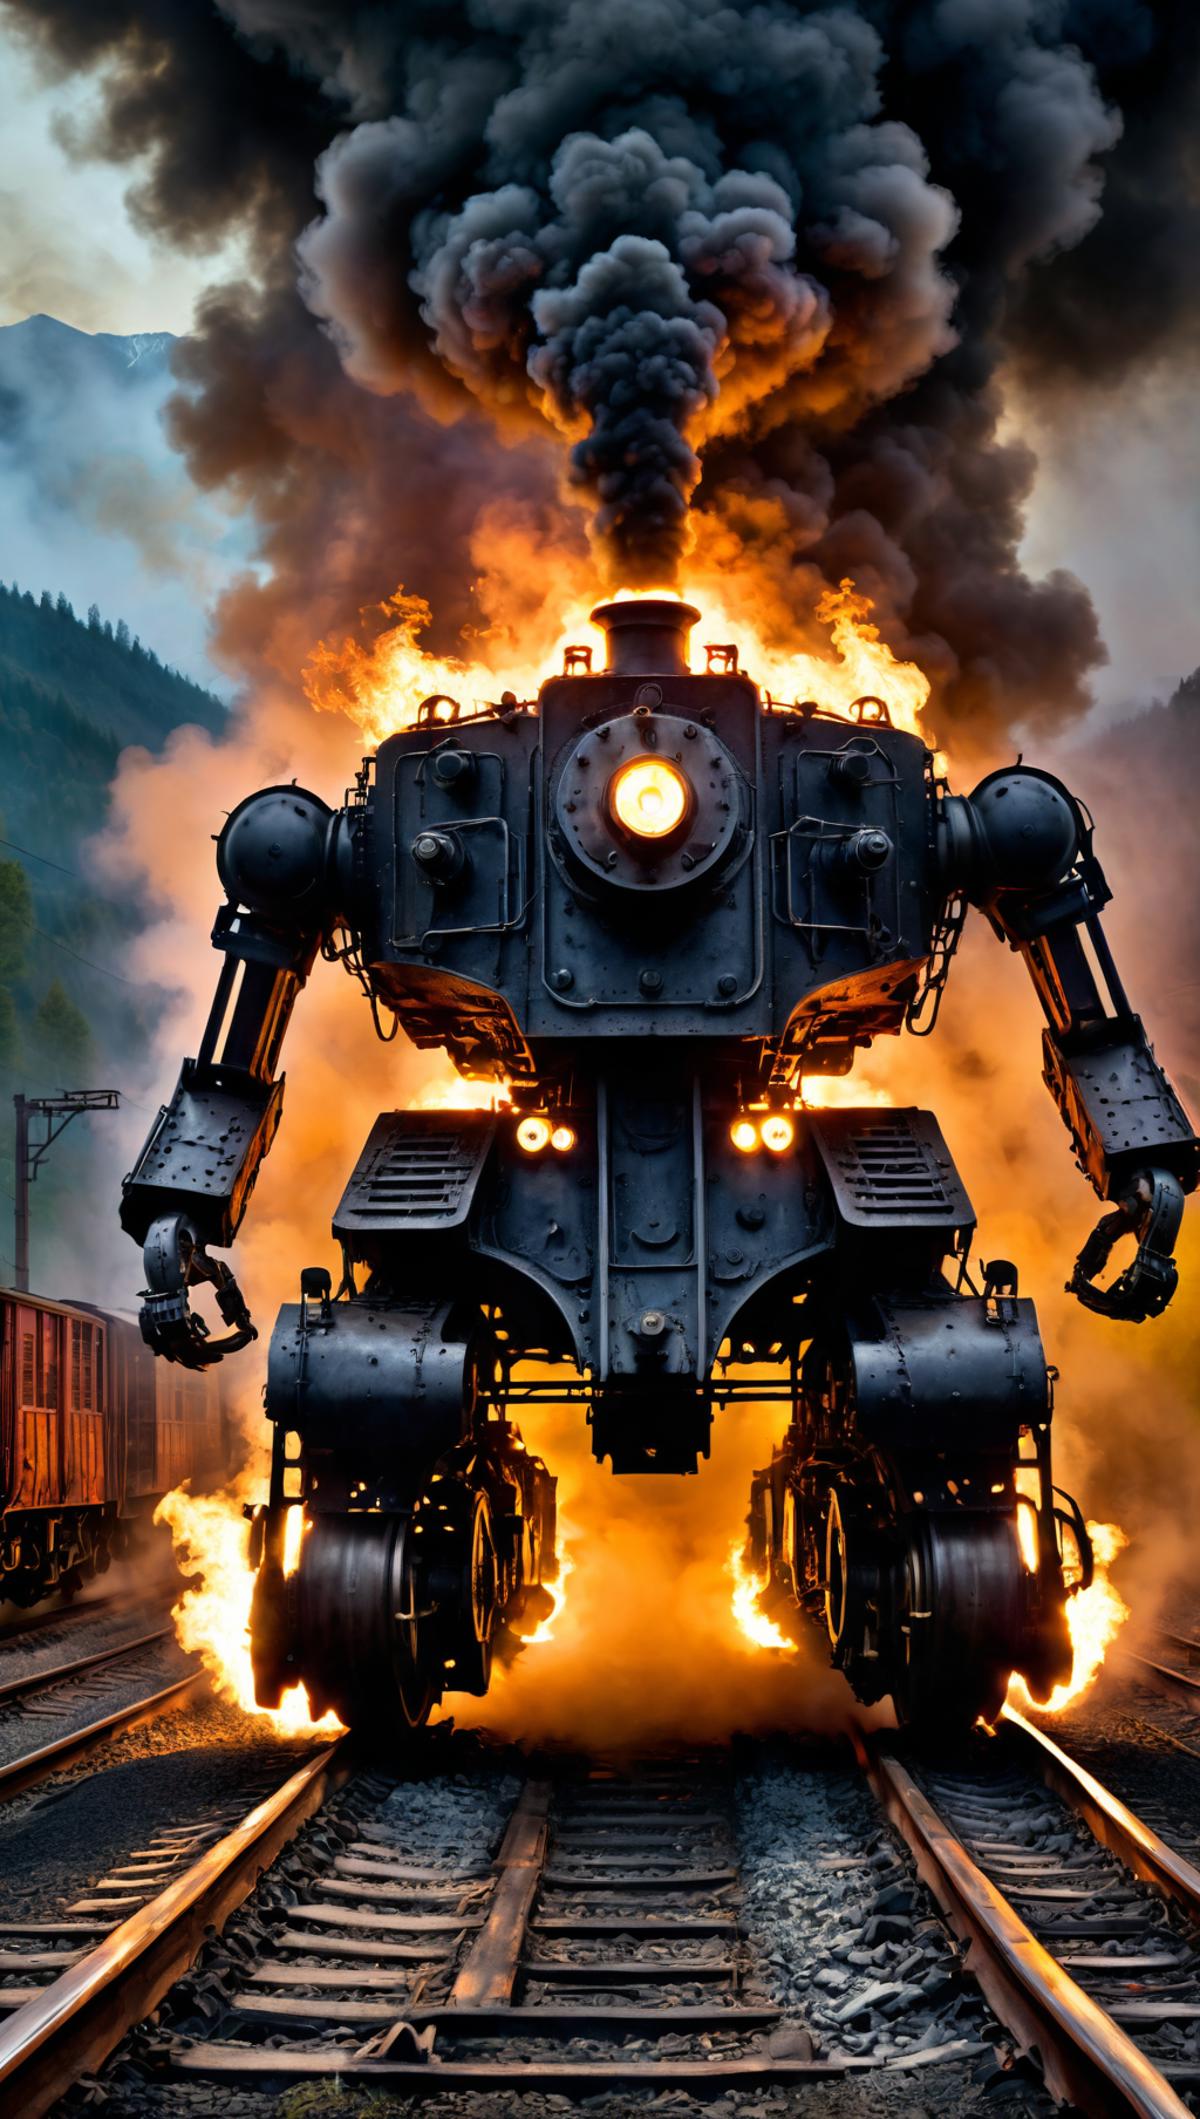 The Steampunk Robot Train Engine with Fire Coming Out of Its Mouth